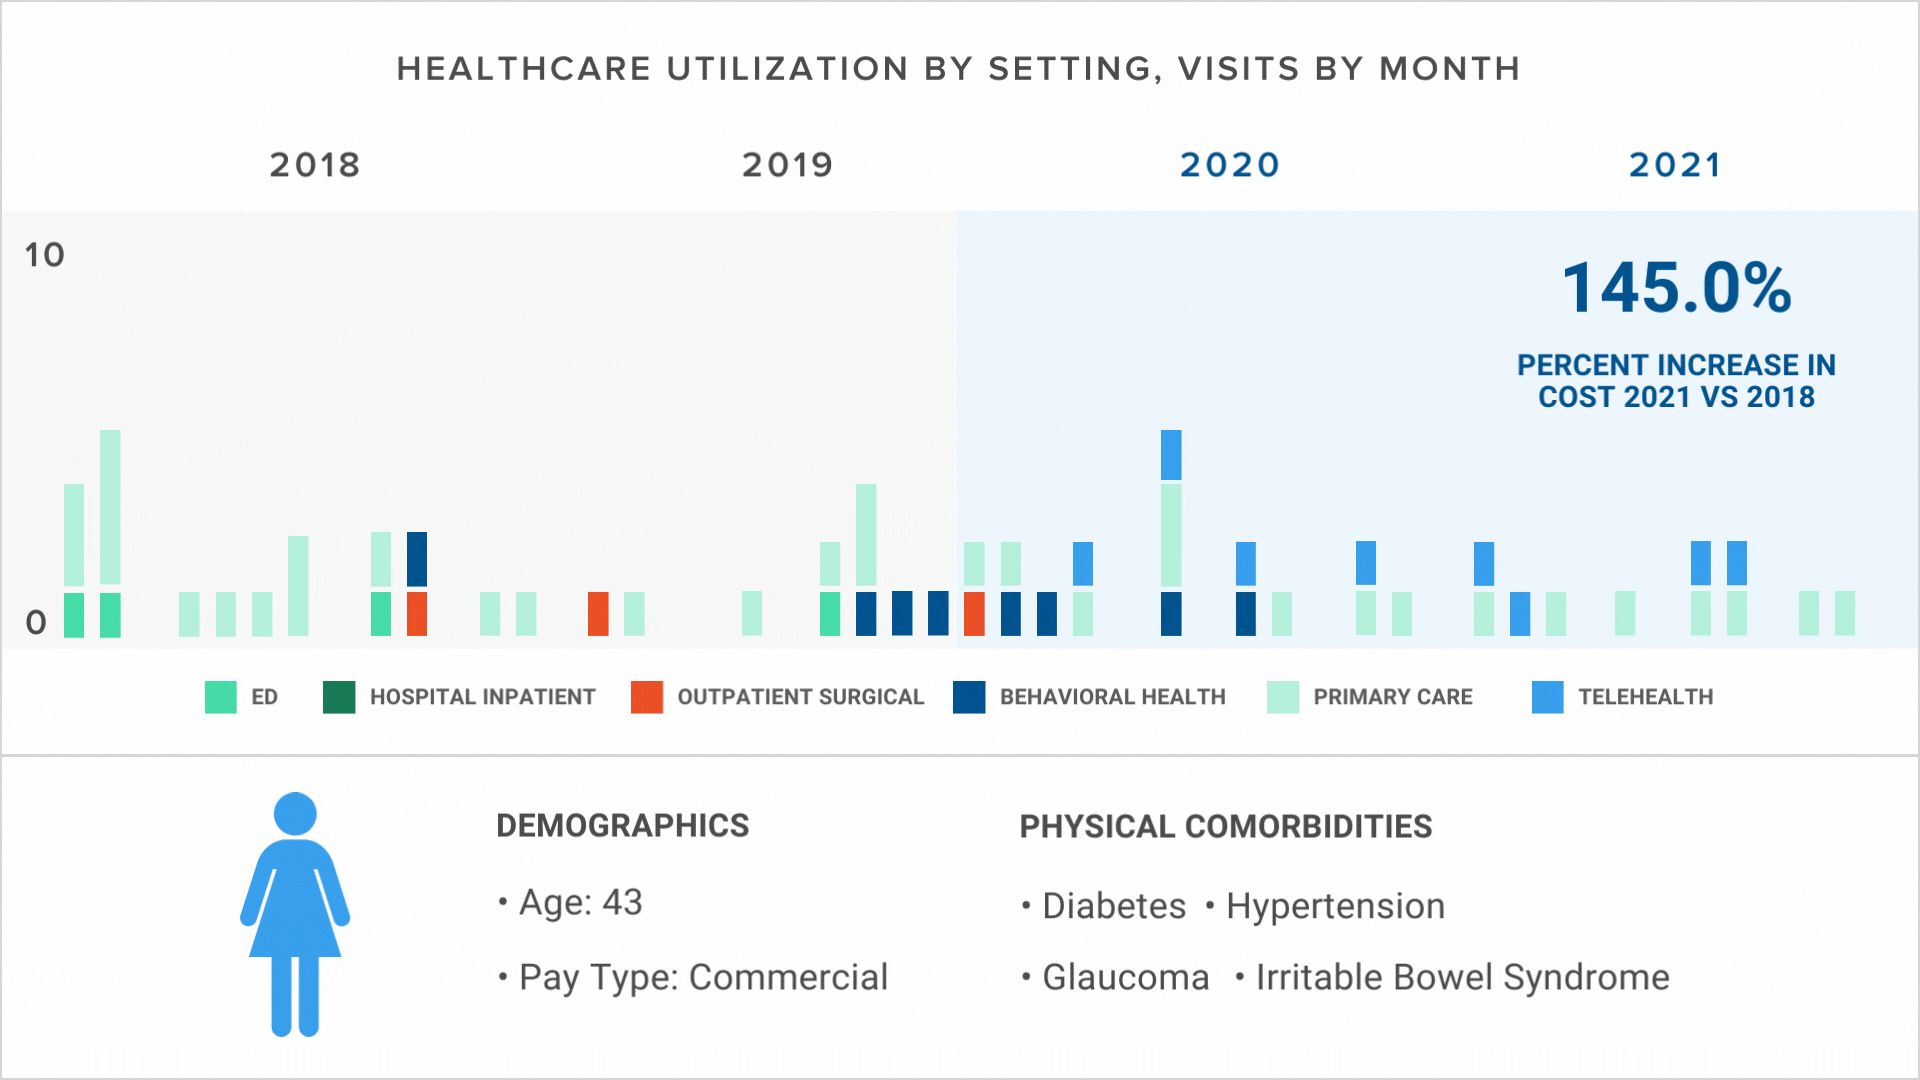 HEALTHCARE UTILIZATION BY SETTING, VISITS BY MONTH